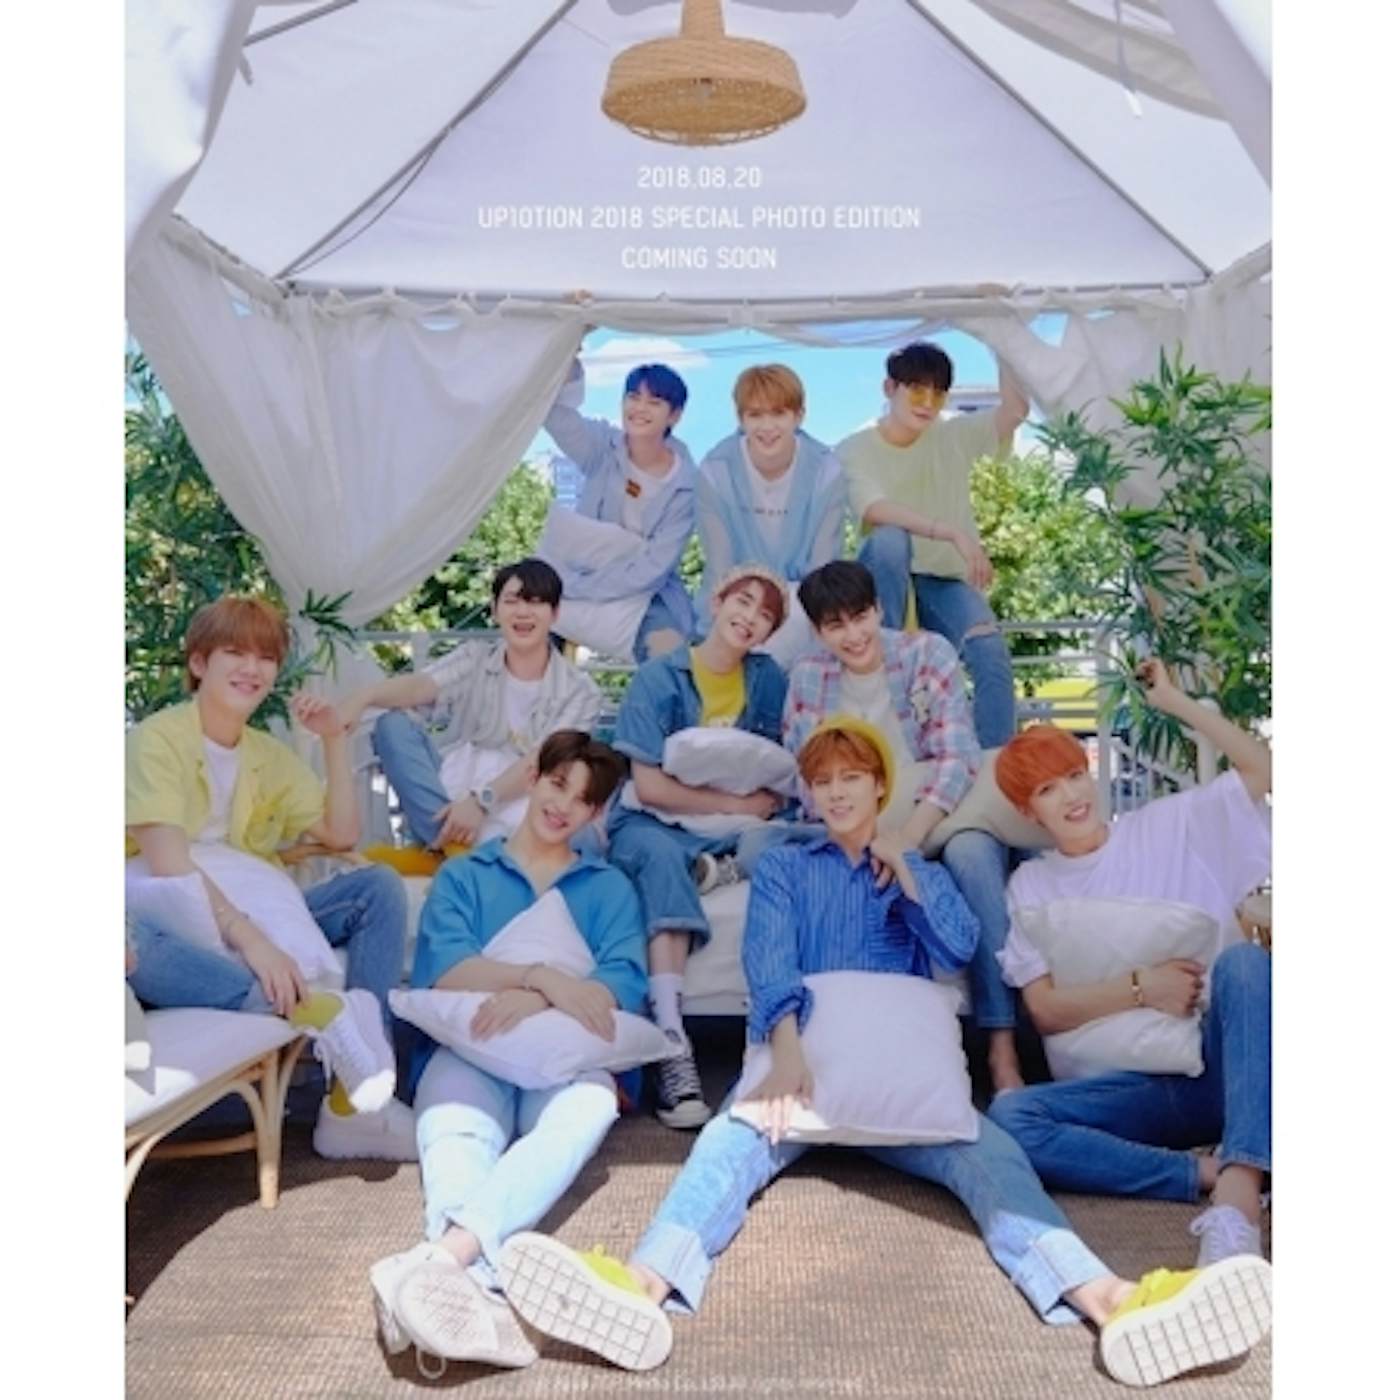 UP10TION 2018 SPECIAL PHOTO EDITION CD